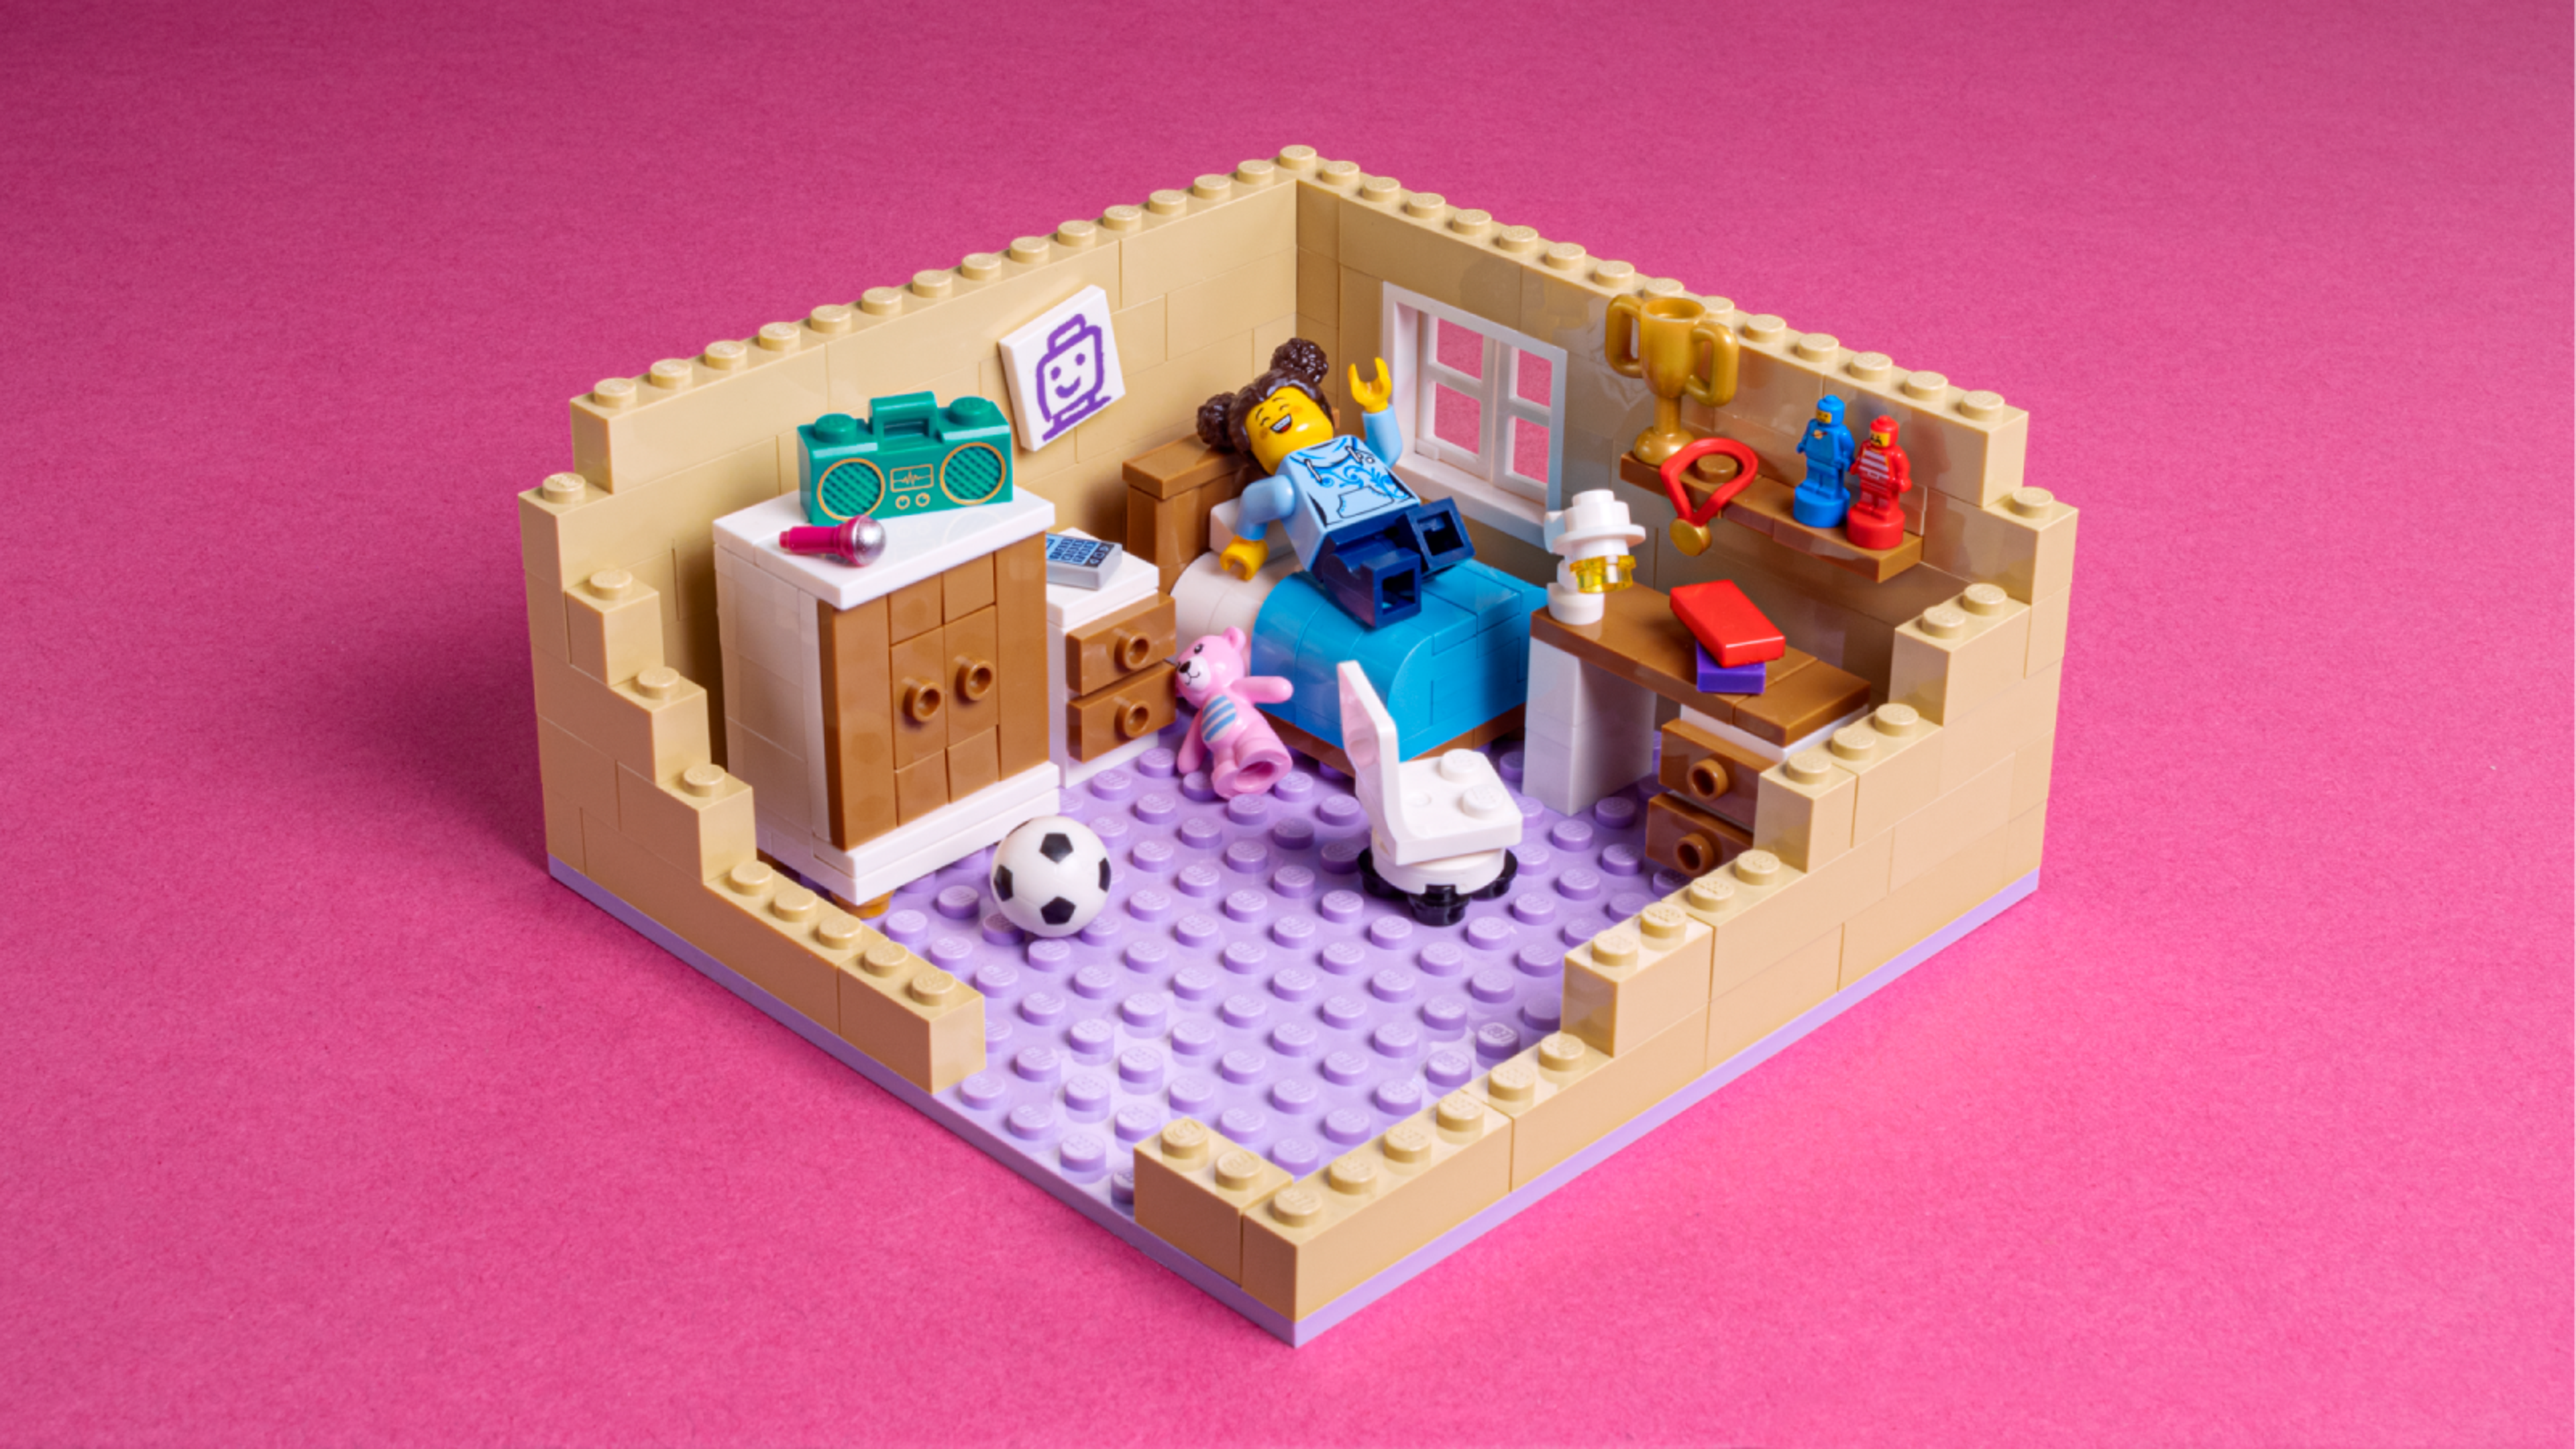 A minifigure lounging around in a LEGO bedroom